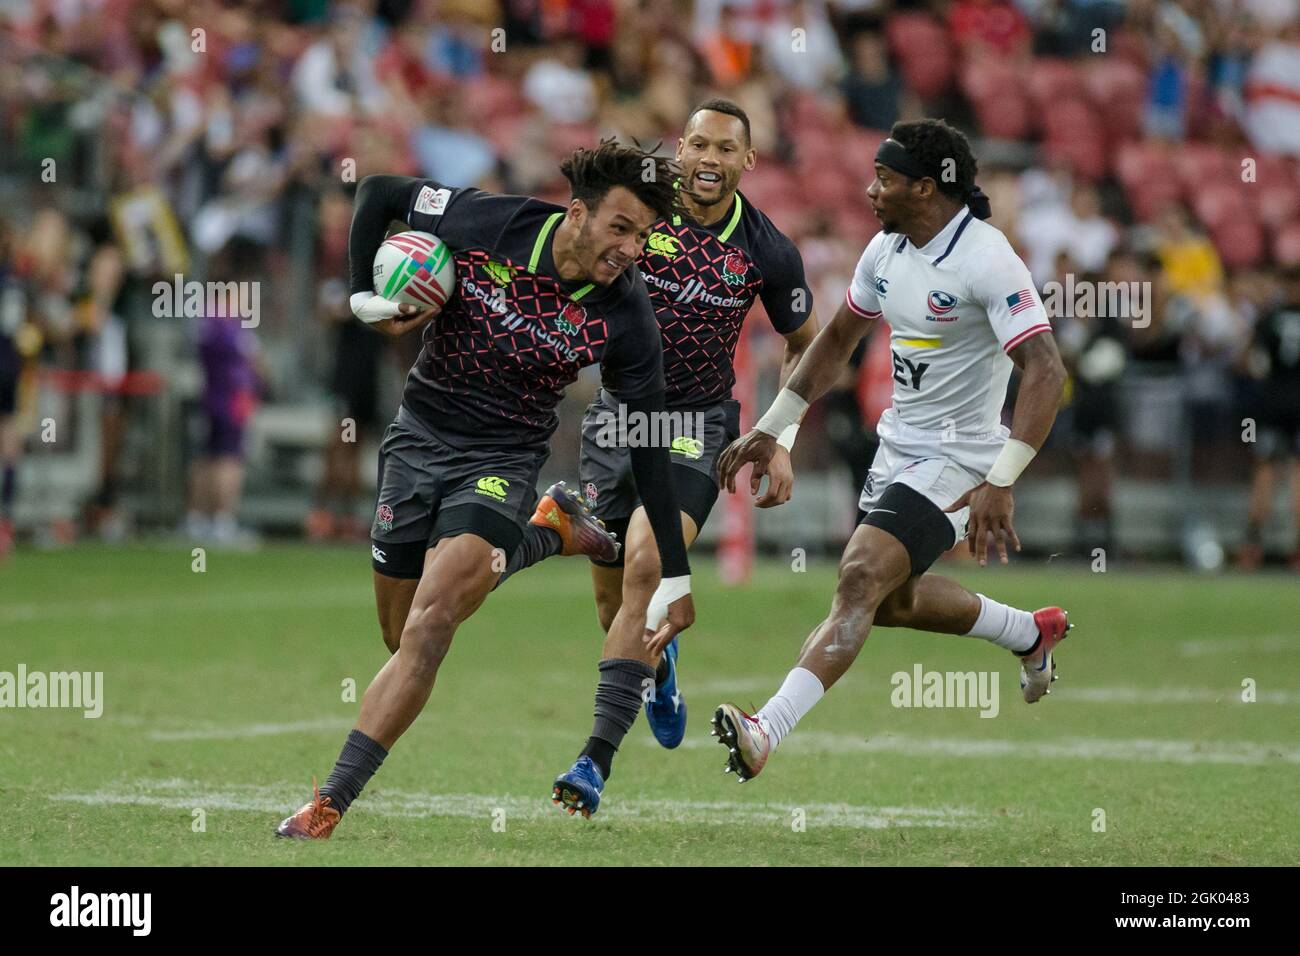 SINGAPORE-APRIL 14: England 7s Team (blue) plays against USA 7s team (white) during the Bronze medal match of HSBC World Rugby Singapore Sevens on April 14, 2019 at National Stadium in Singapore Stock Photo